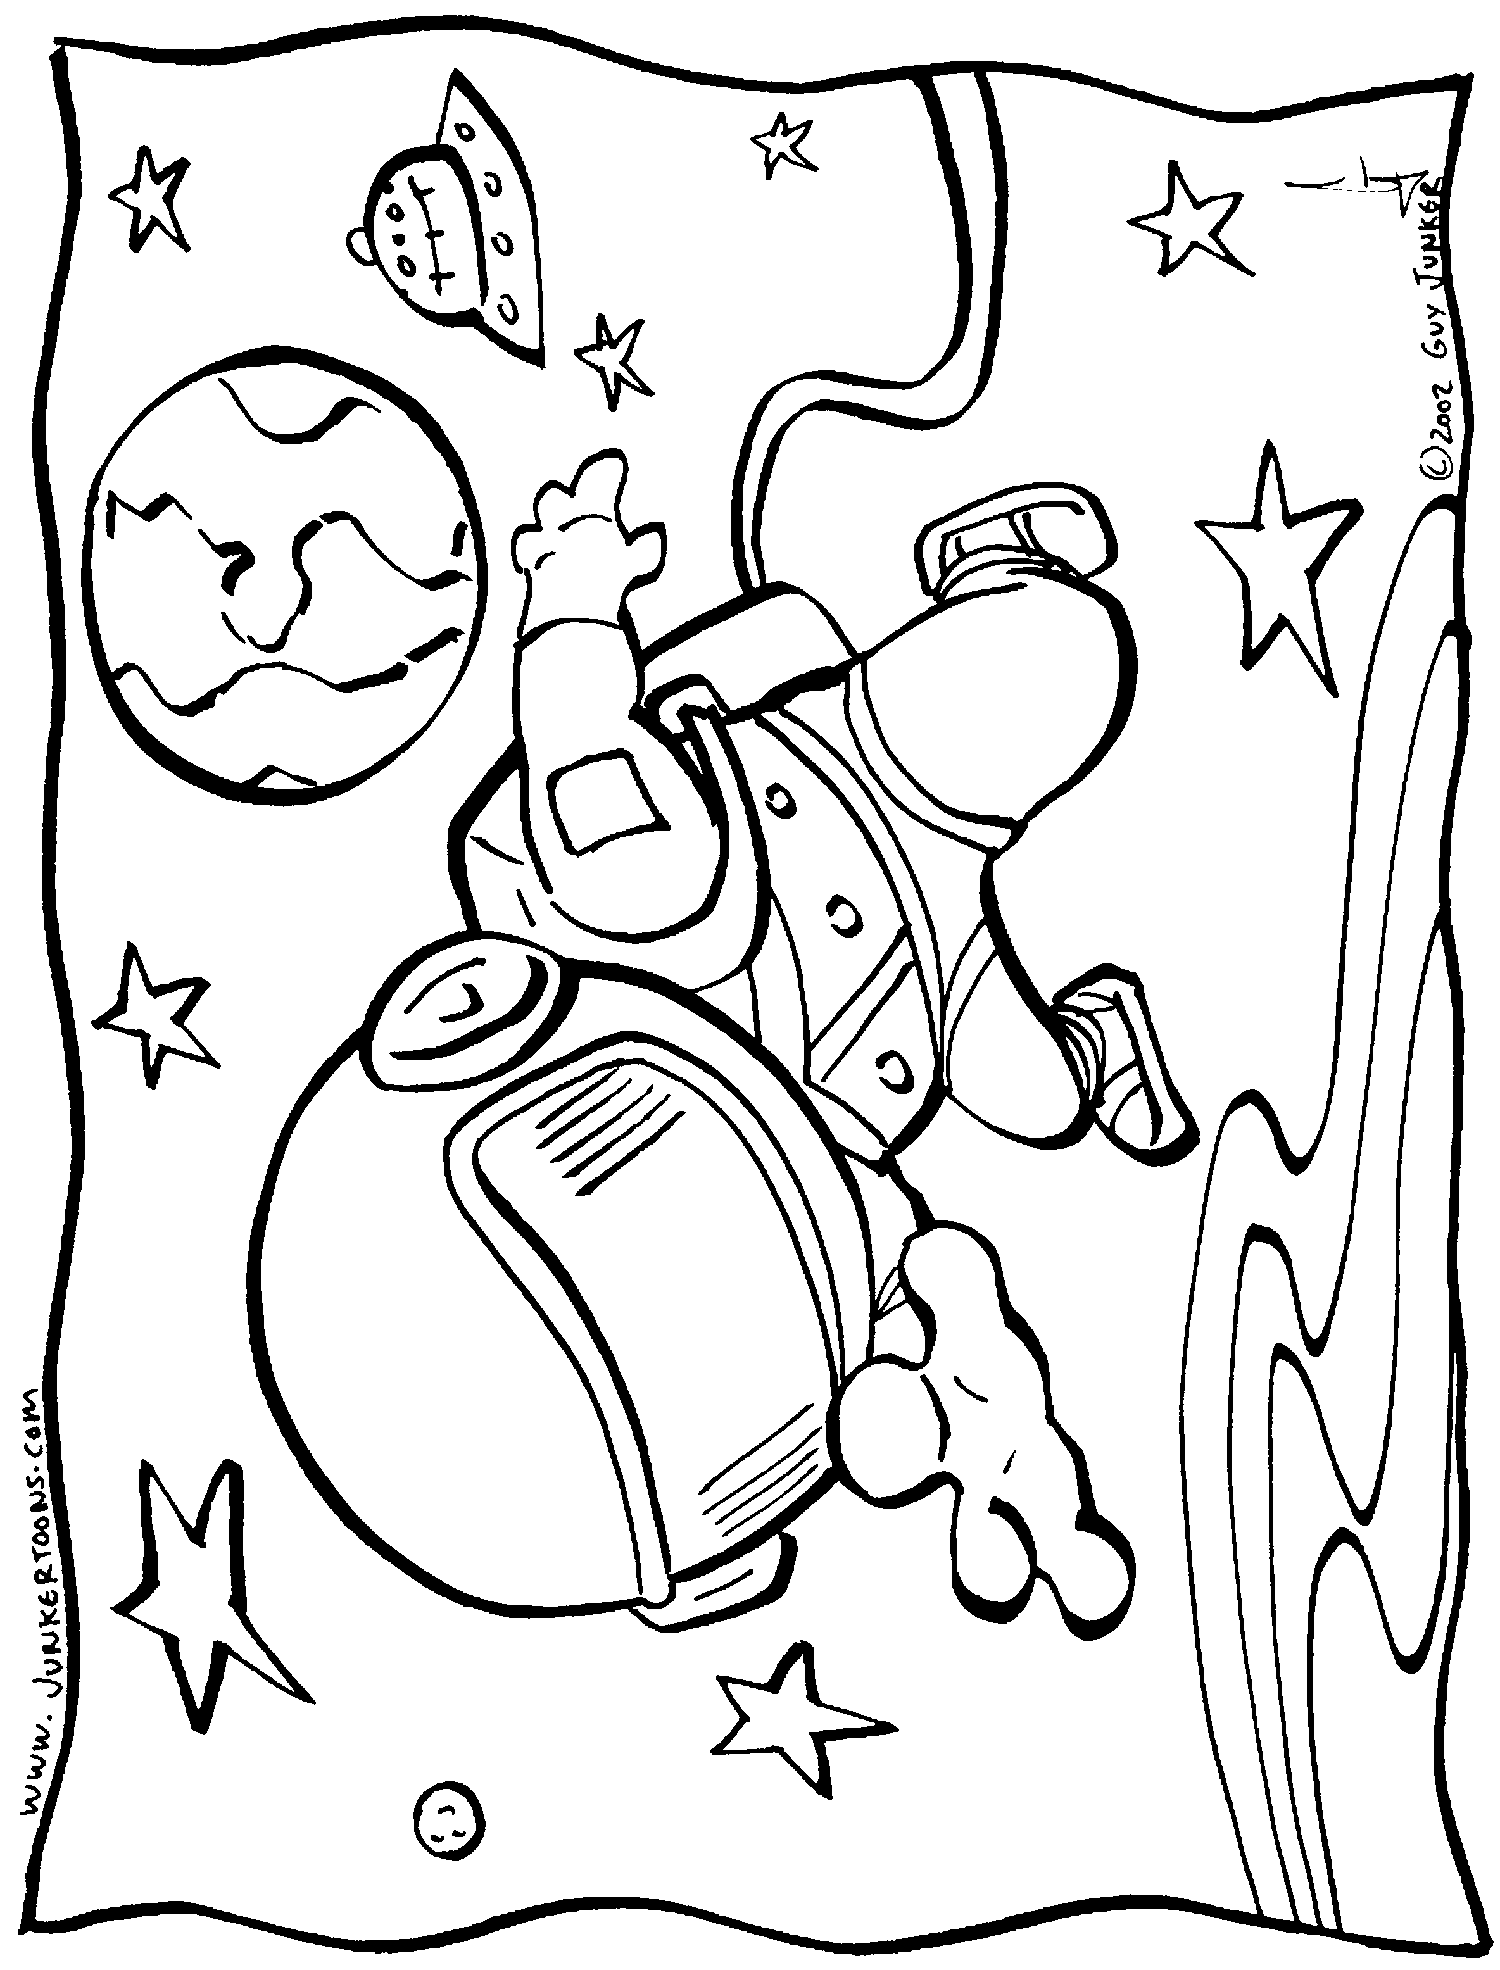 Coloring page: Astronaut (Jobs) #87666 - Free Printable Coloring Pages